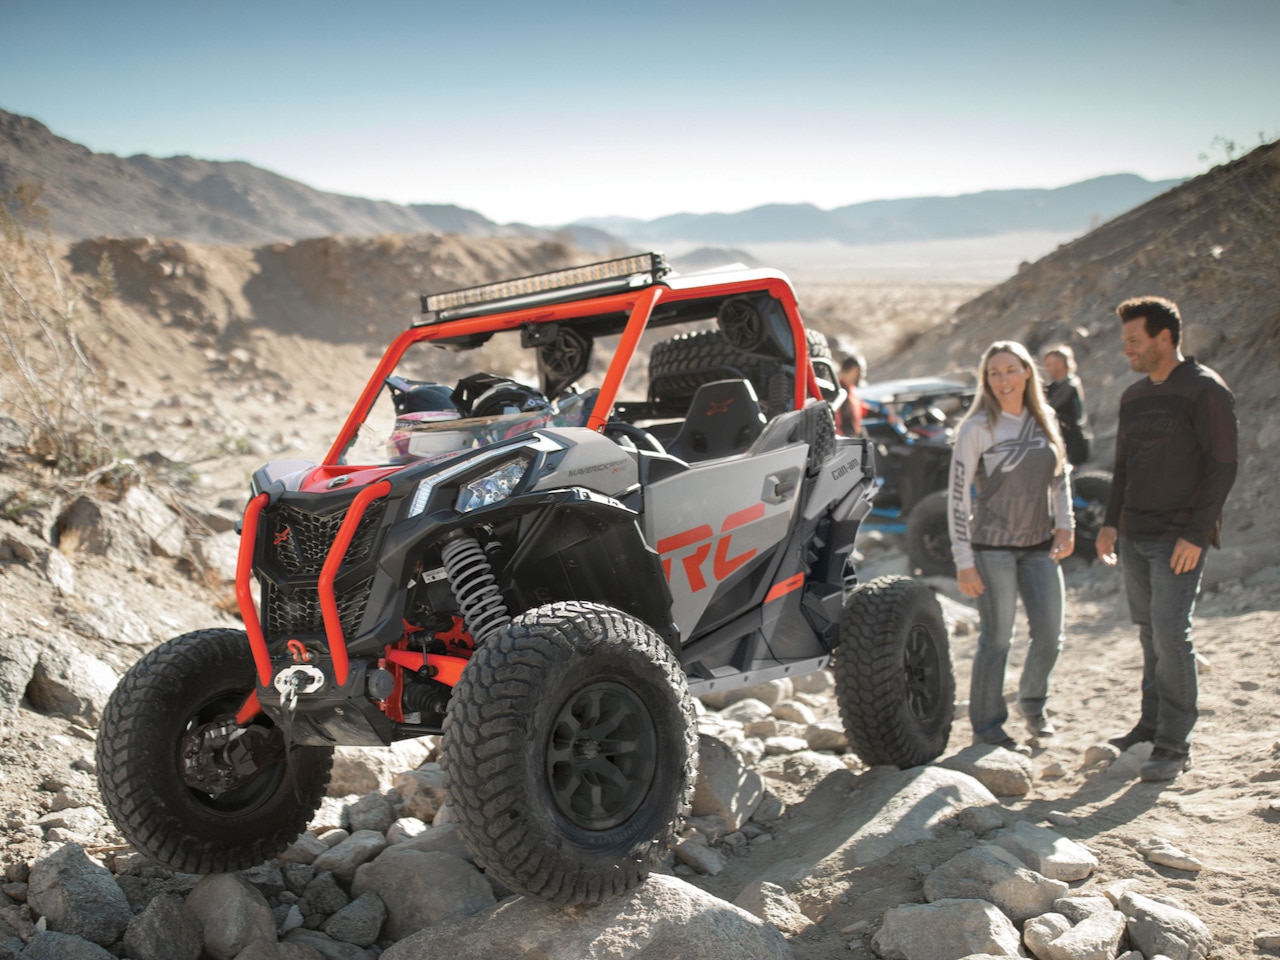 Customized off-road ATV tour in Cotopaxi, CO